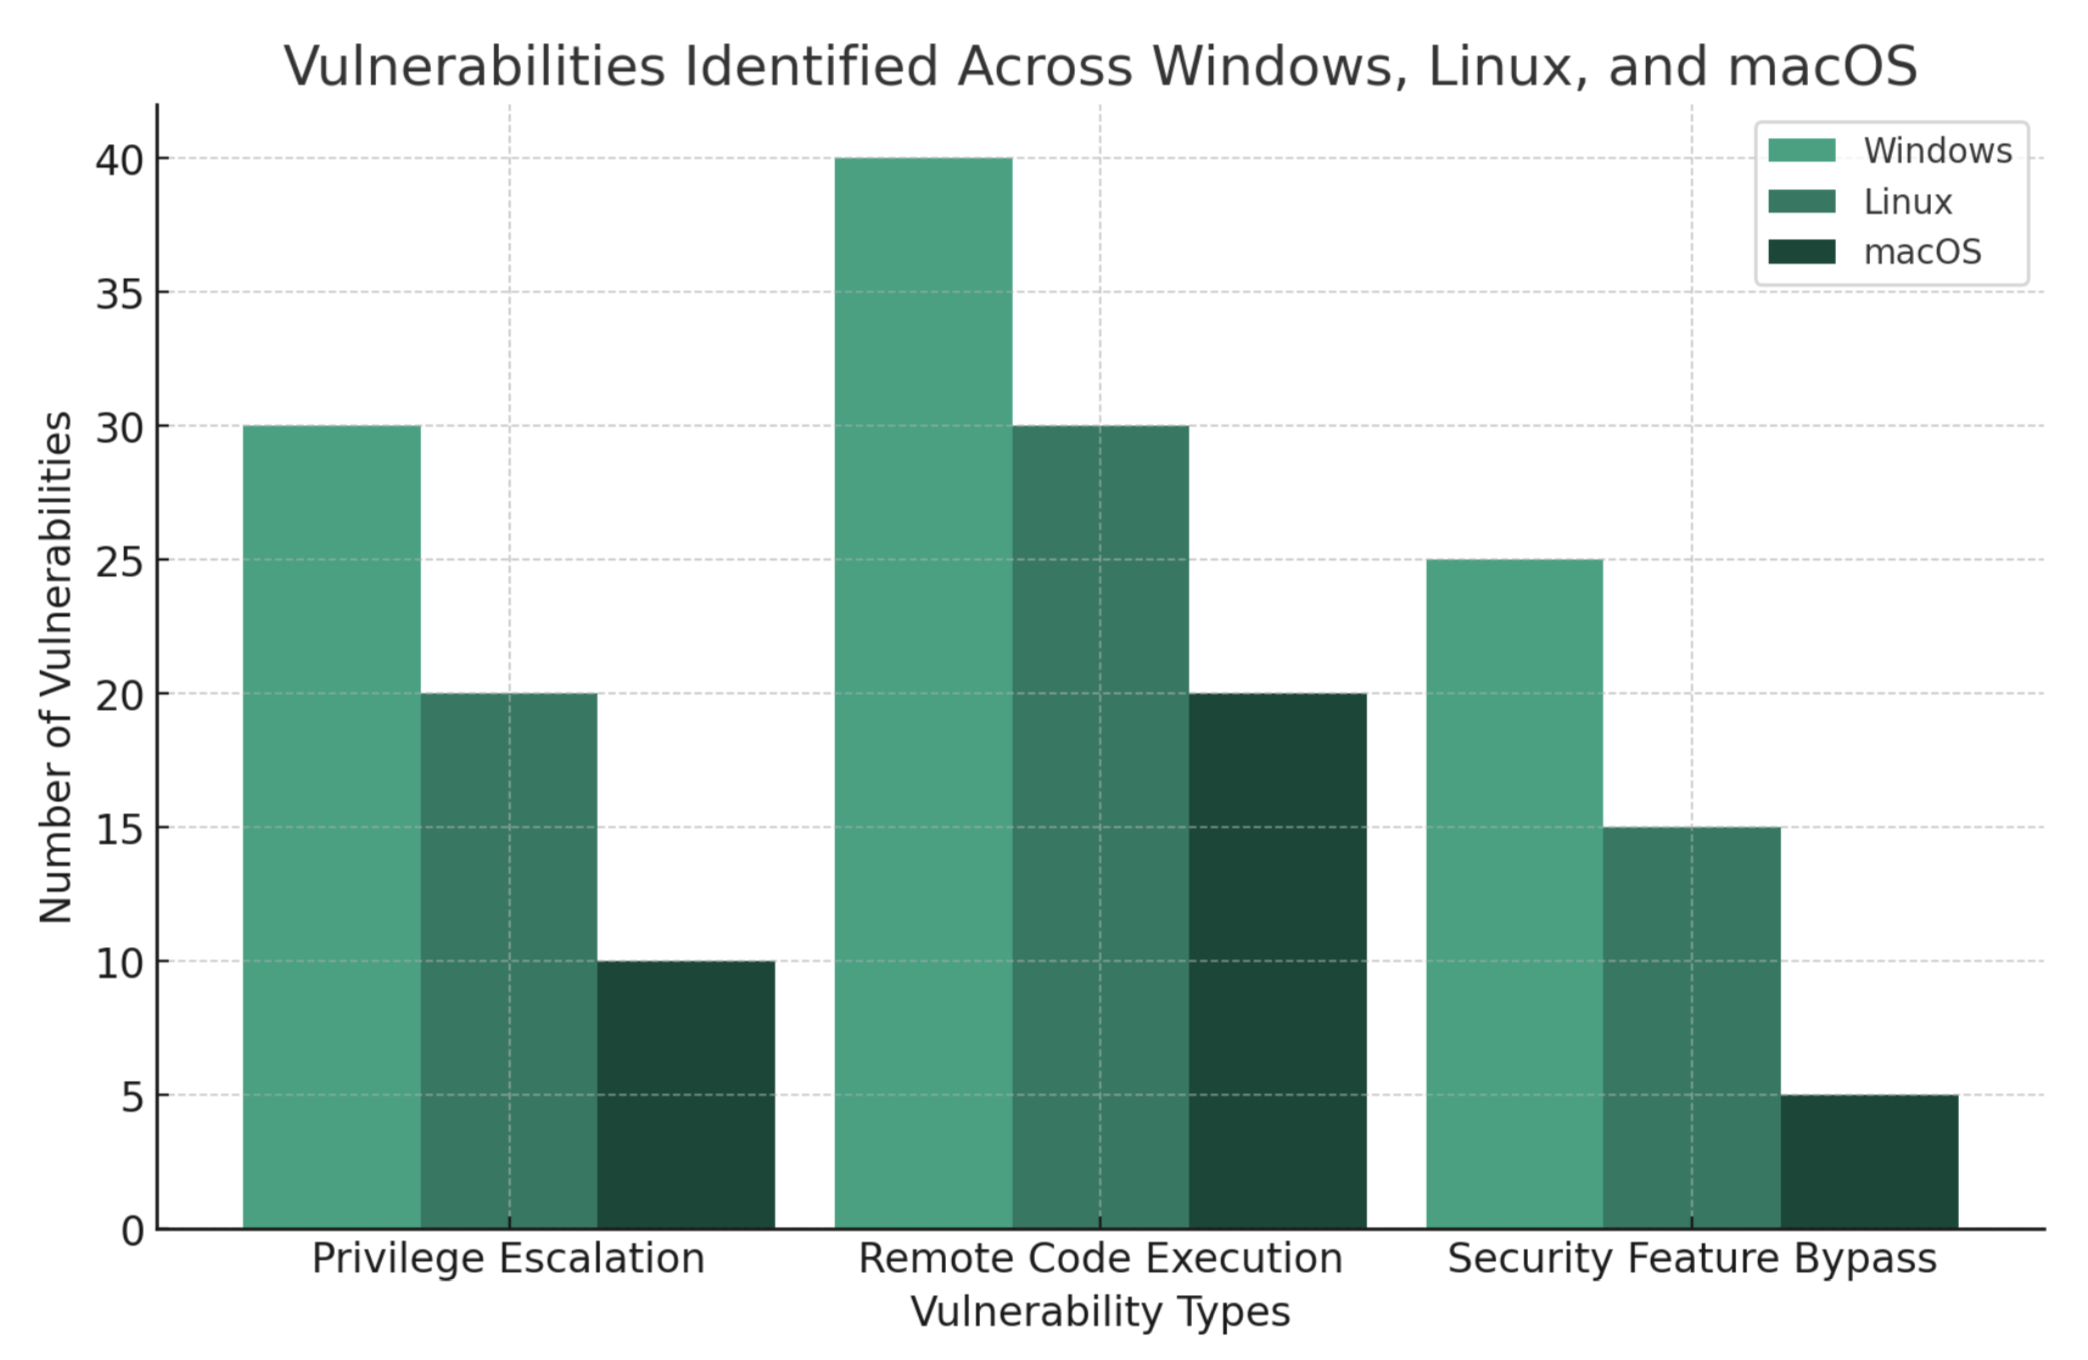 Vulnerabilities Identified Across Windows, Linux, and macOS